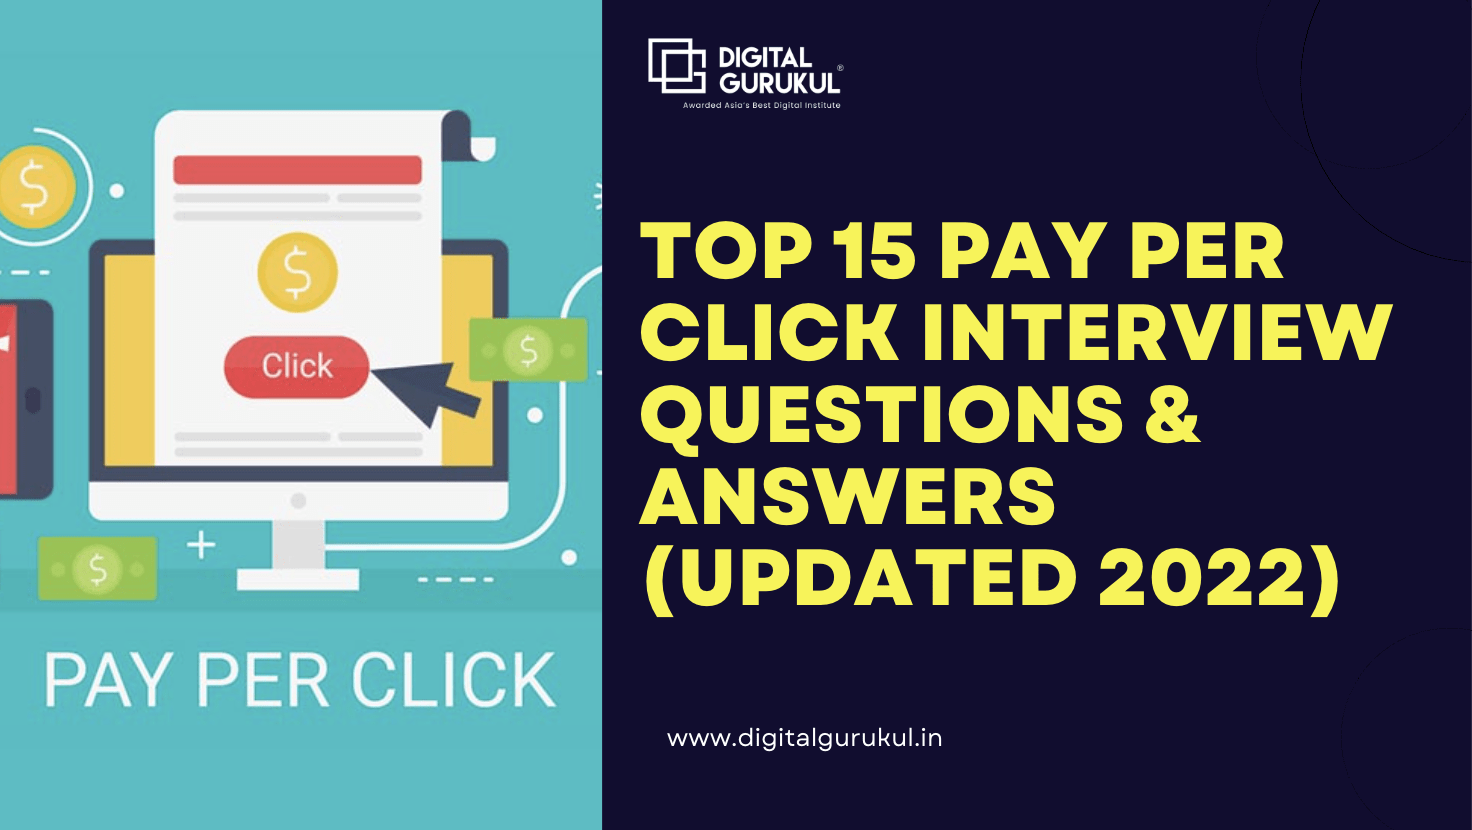 Top 15 Pay Per Click Interview questions & answers (Updated 2022)